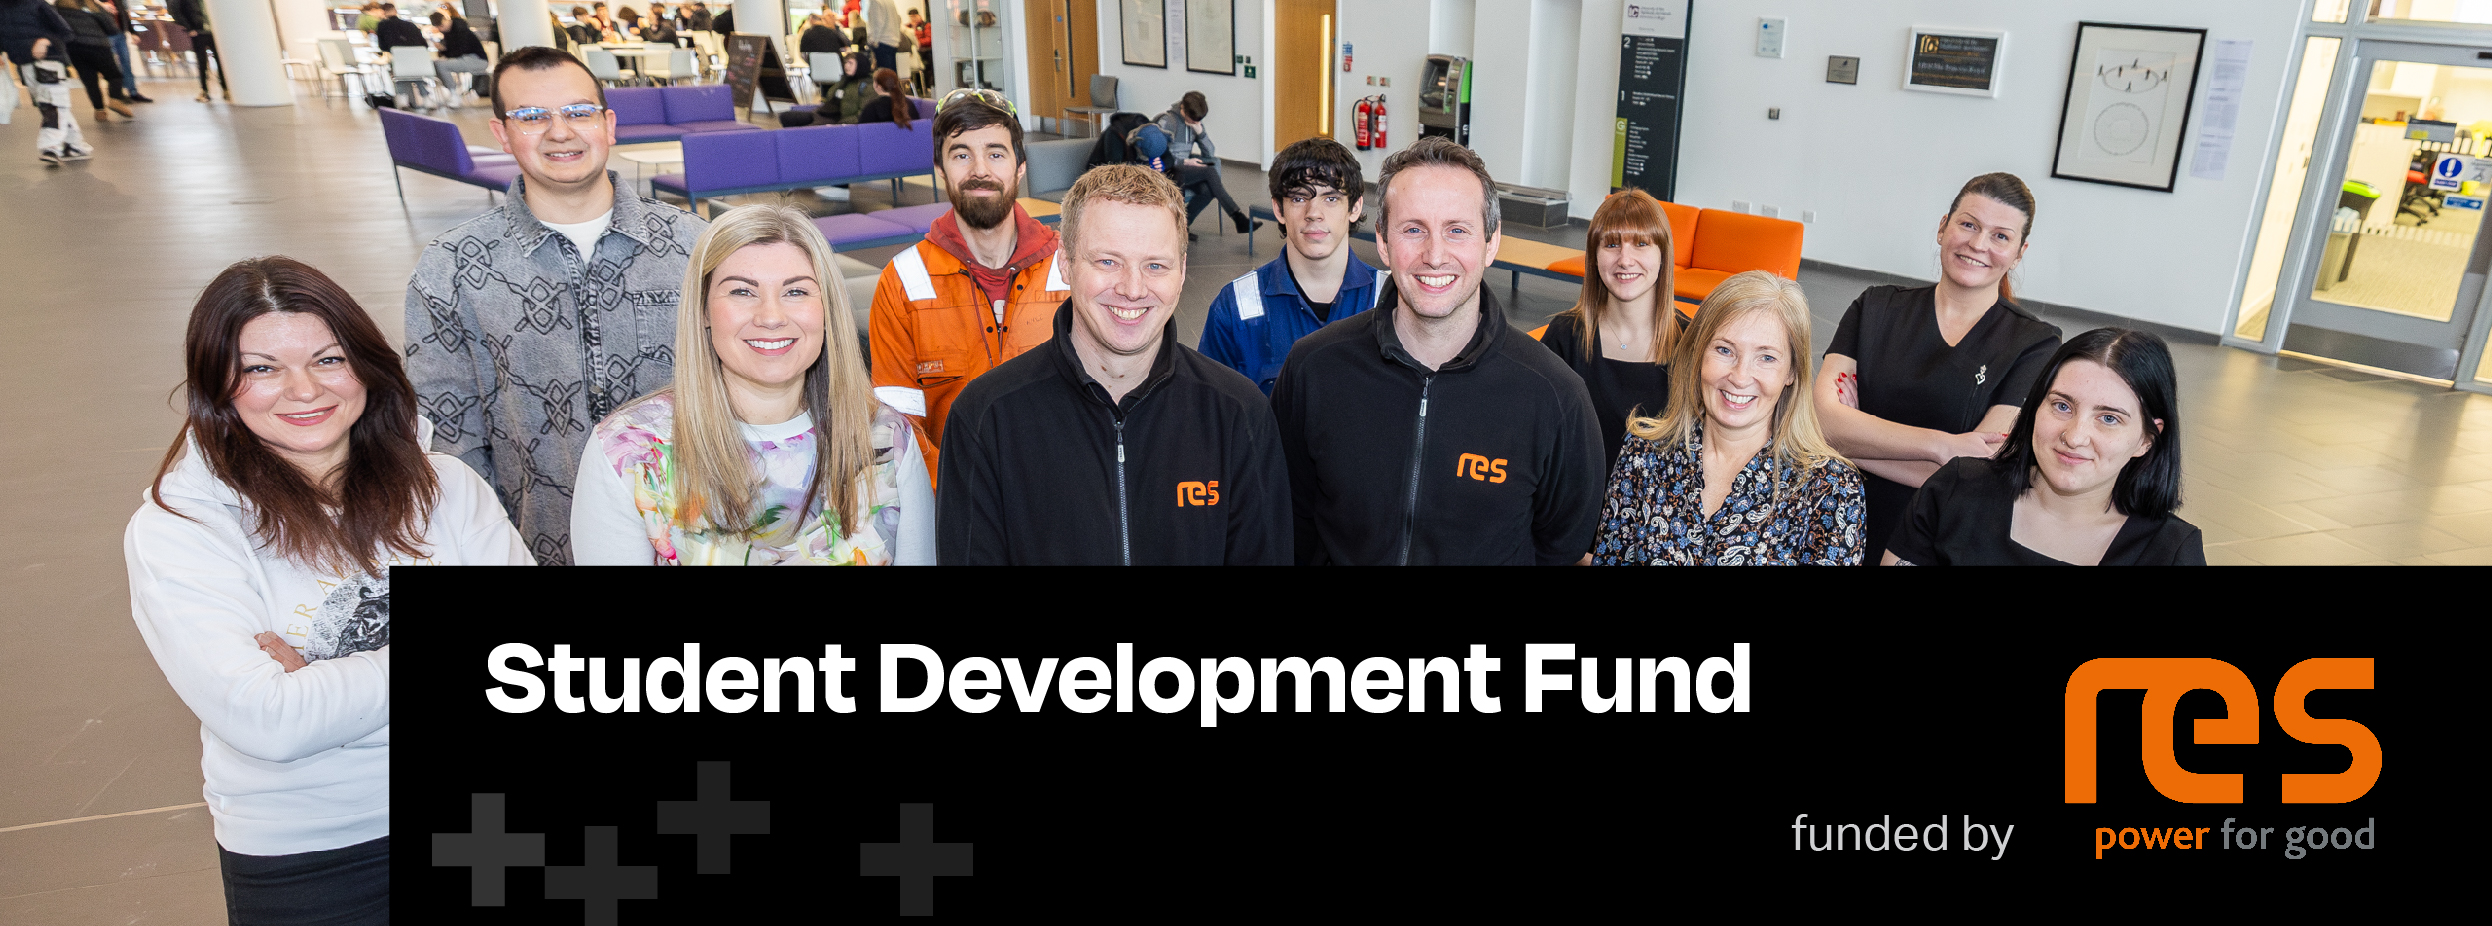 Student Development Fund | Funded by RES power for good